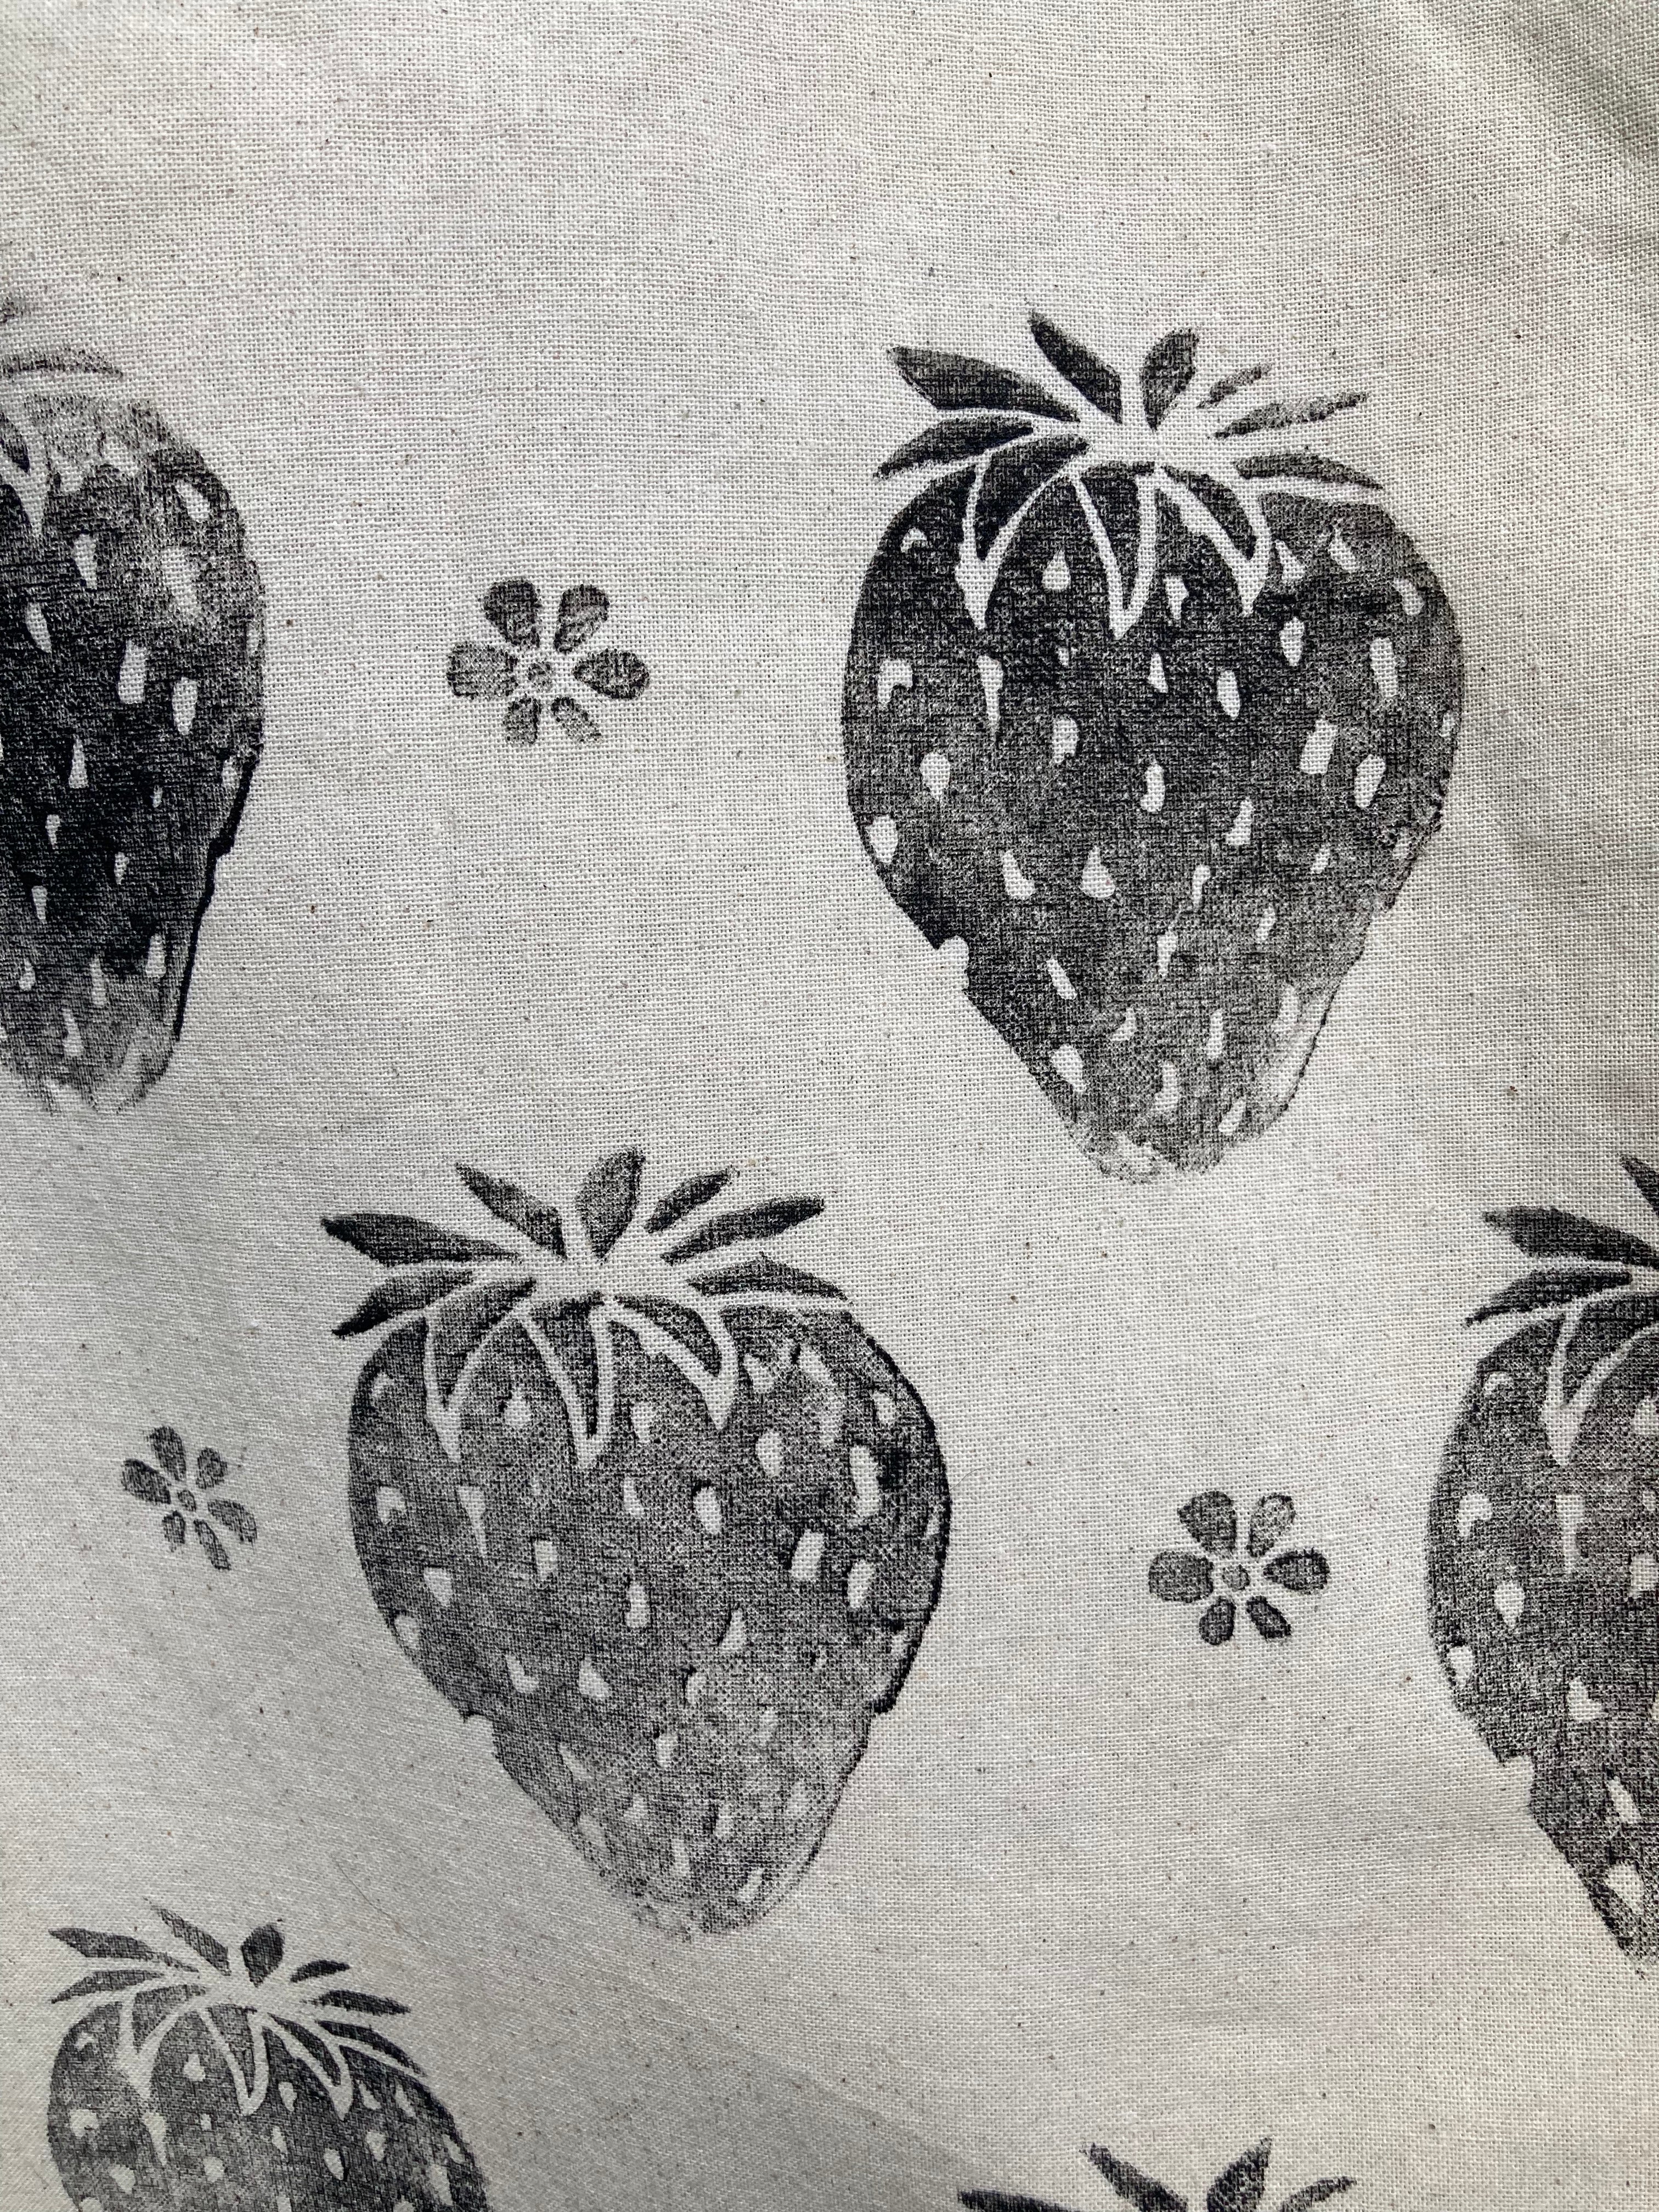 Wild Sour Hand Printed Strawberry Canvas Tote